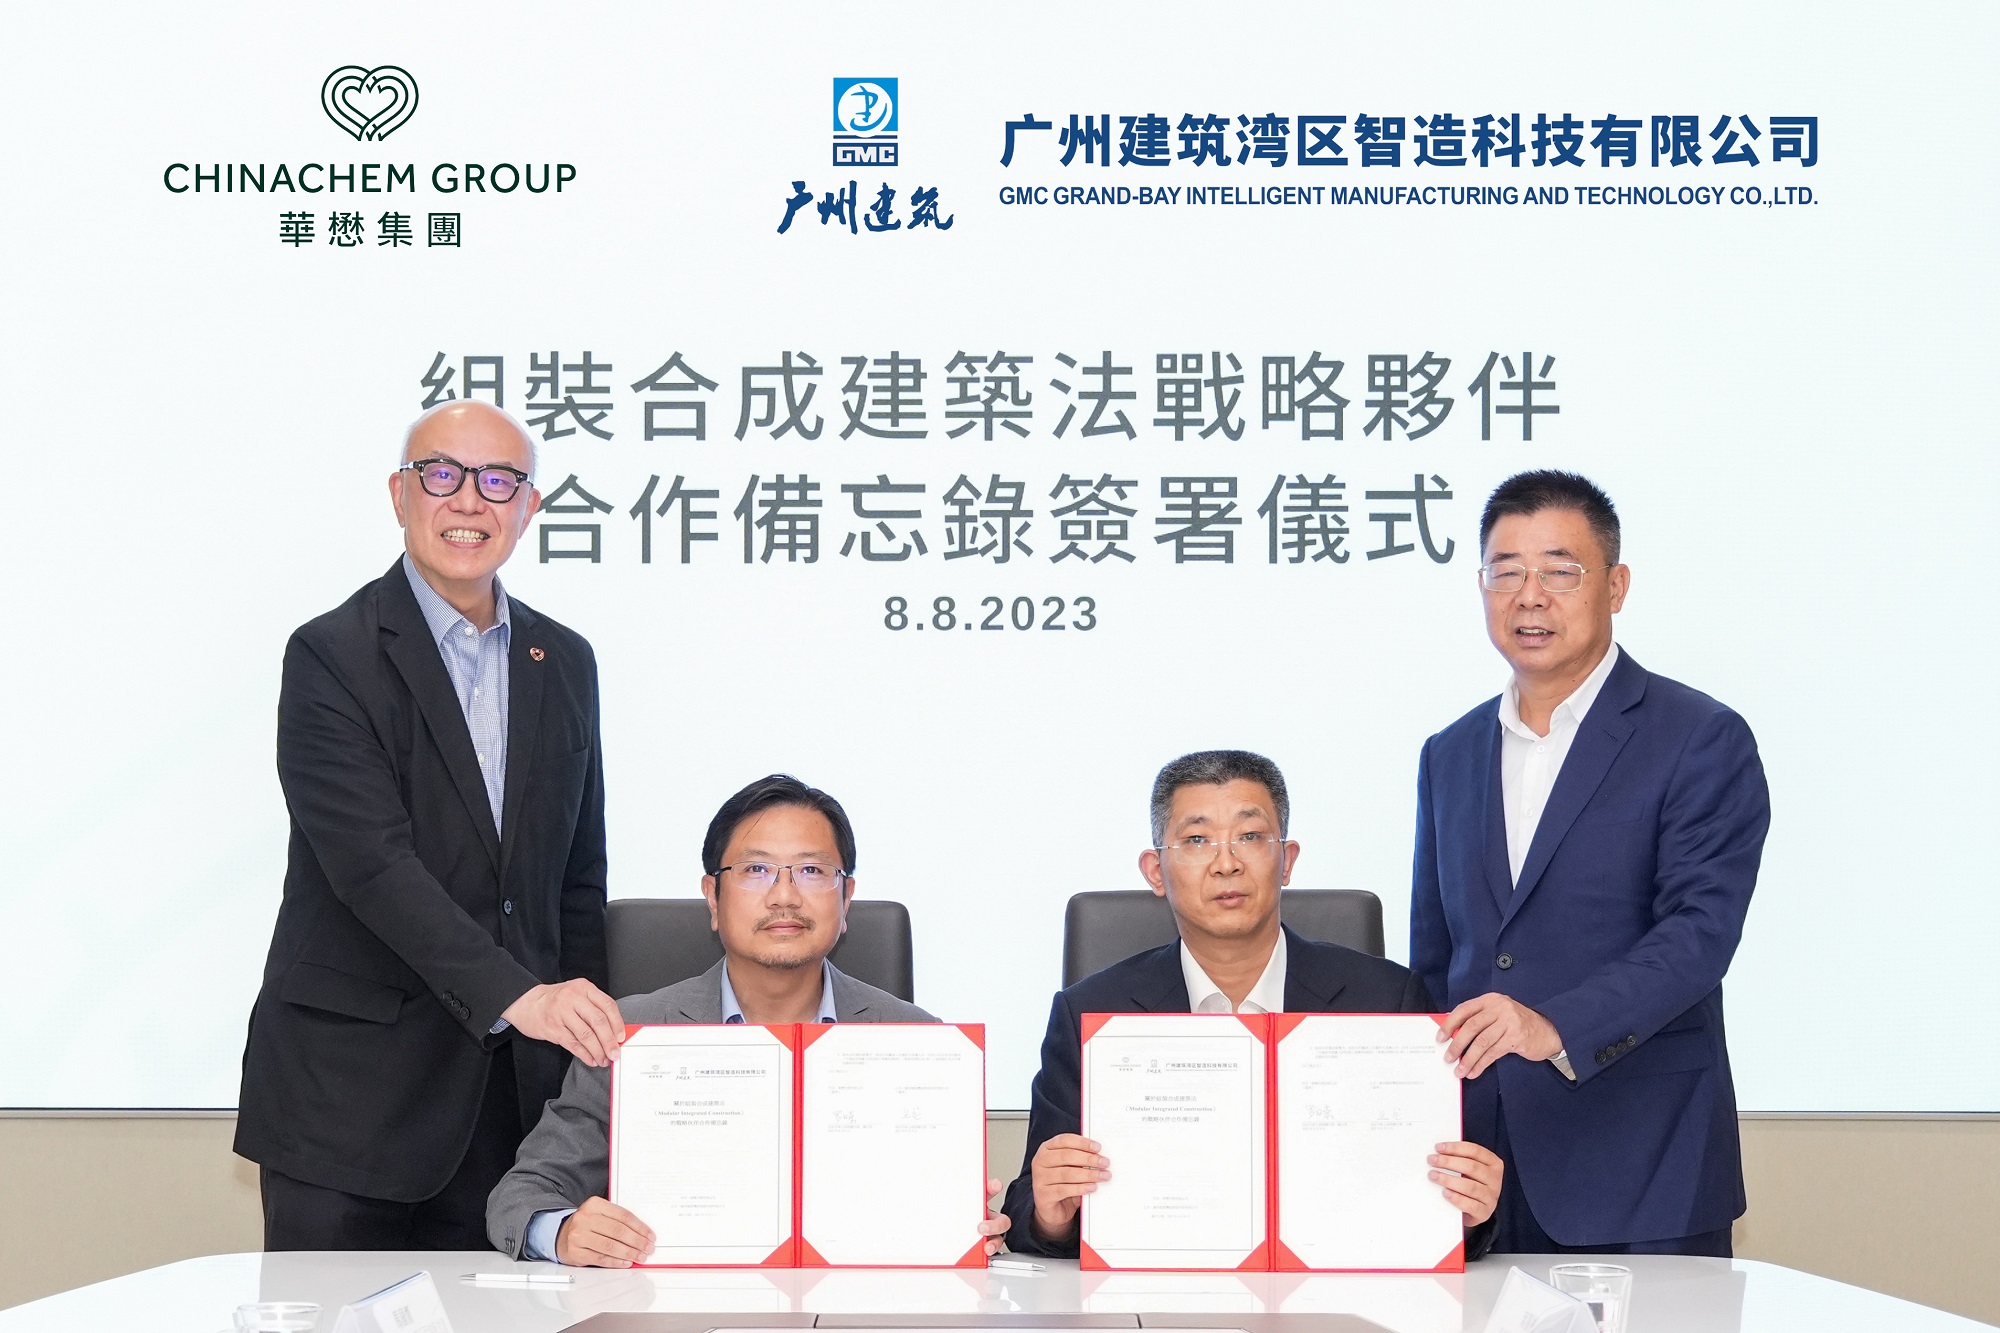 Chinachem Group has formed a strategic partnership with GMC Grand-Bay Intelligent Manufacturing and Technology Co., Ltd. for the development and application of the Modular Integrated Construction system. Witnessed by Chinachem Group’s Executive Director and CEO Donald Choi (first left) and Chairman of Guangzhou Municipal Construction Group Co., Ltd. Liang Huqing (first right), the MoU is signed by Chinachem Group Deputy Project Director Edmond Lo (second left) and Chairman of GMC Grand-Bay Intelligent Manufacturing and Technology Co., Ltd. Wang Long (second right).